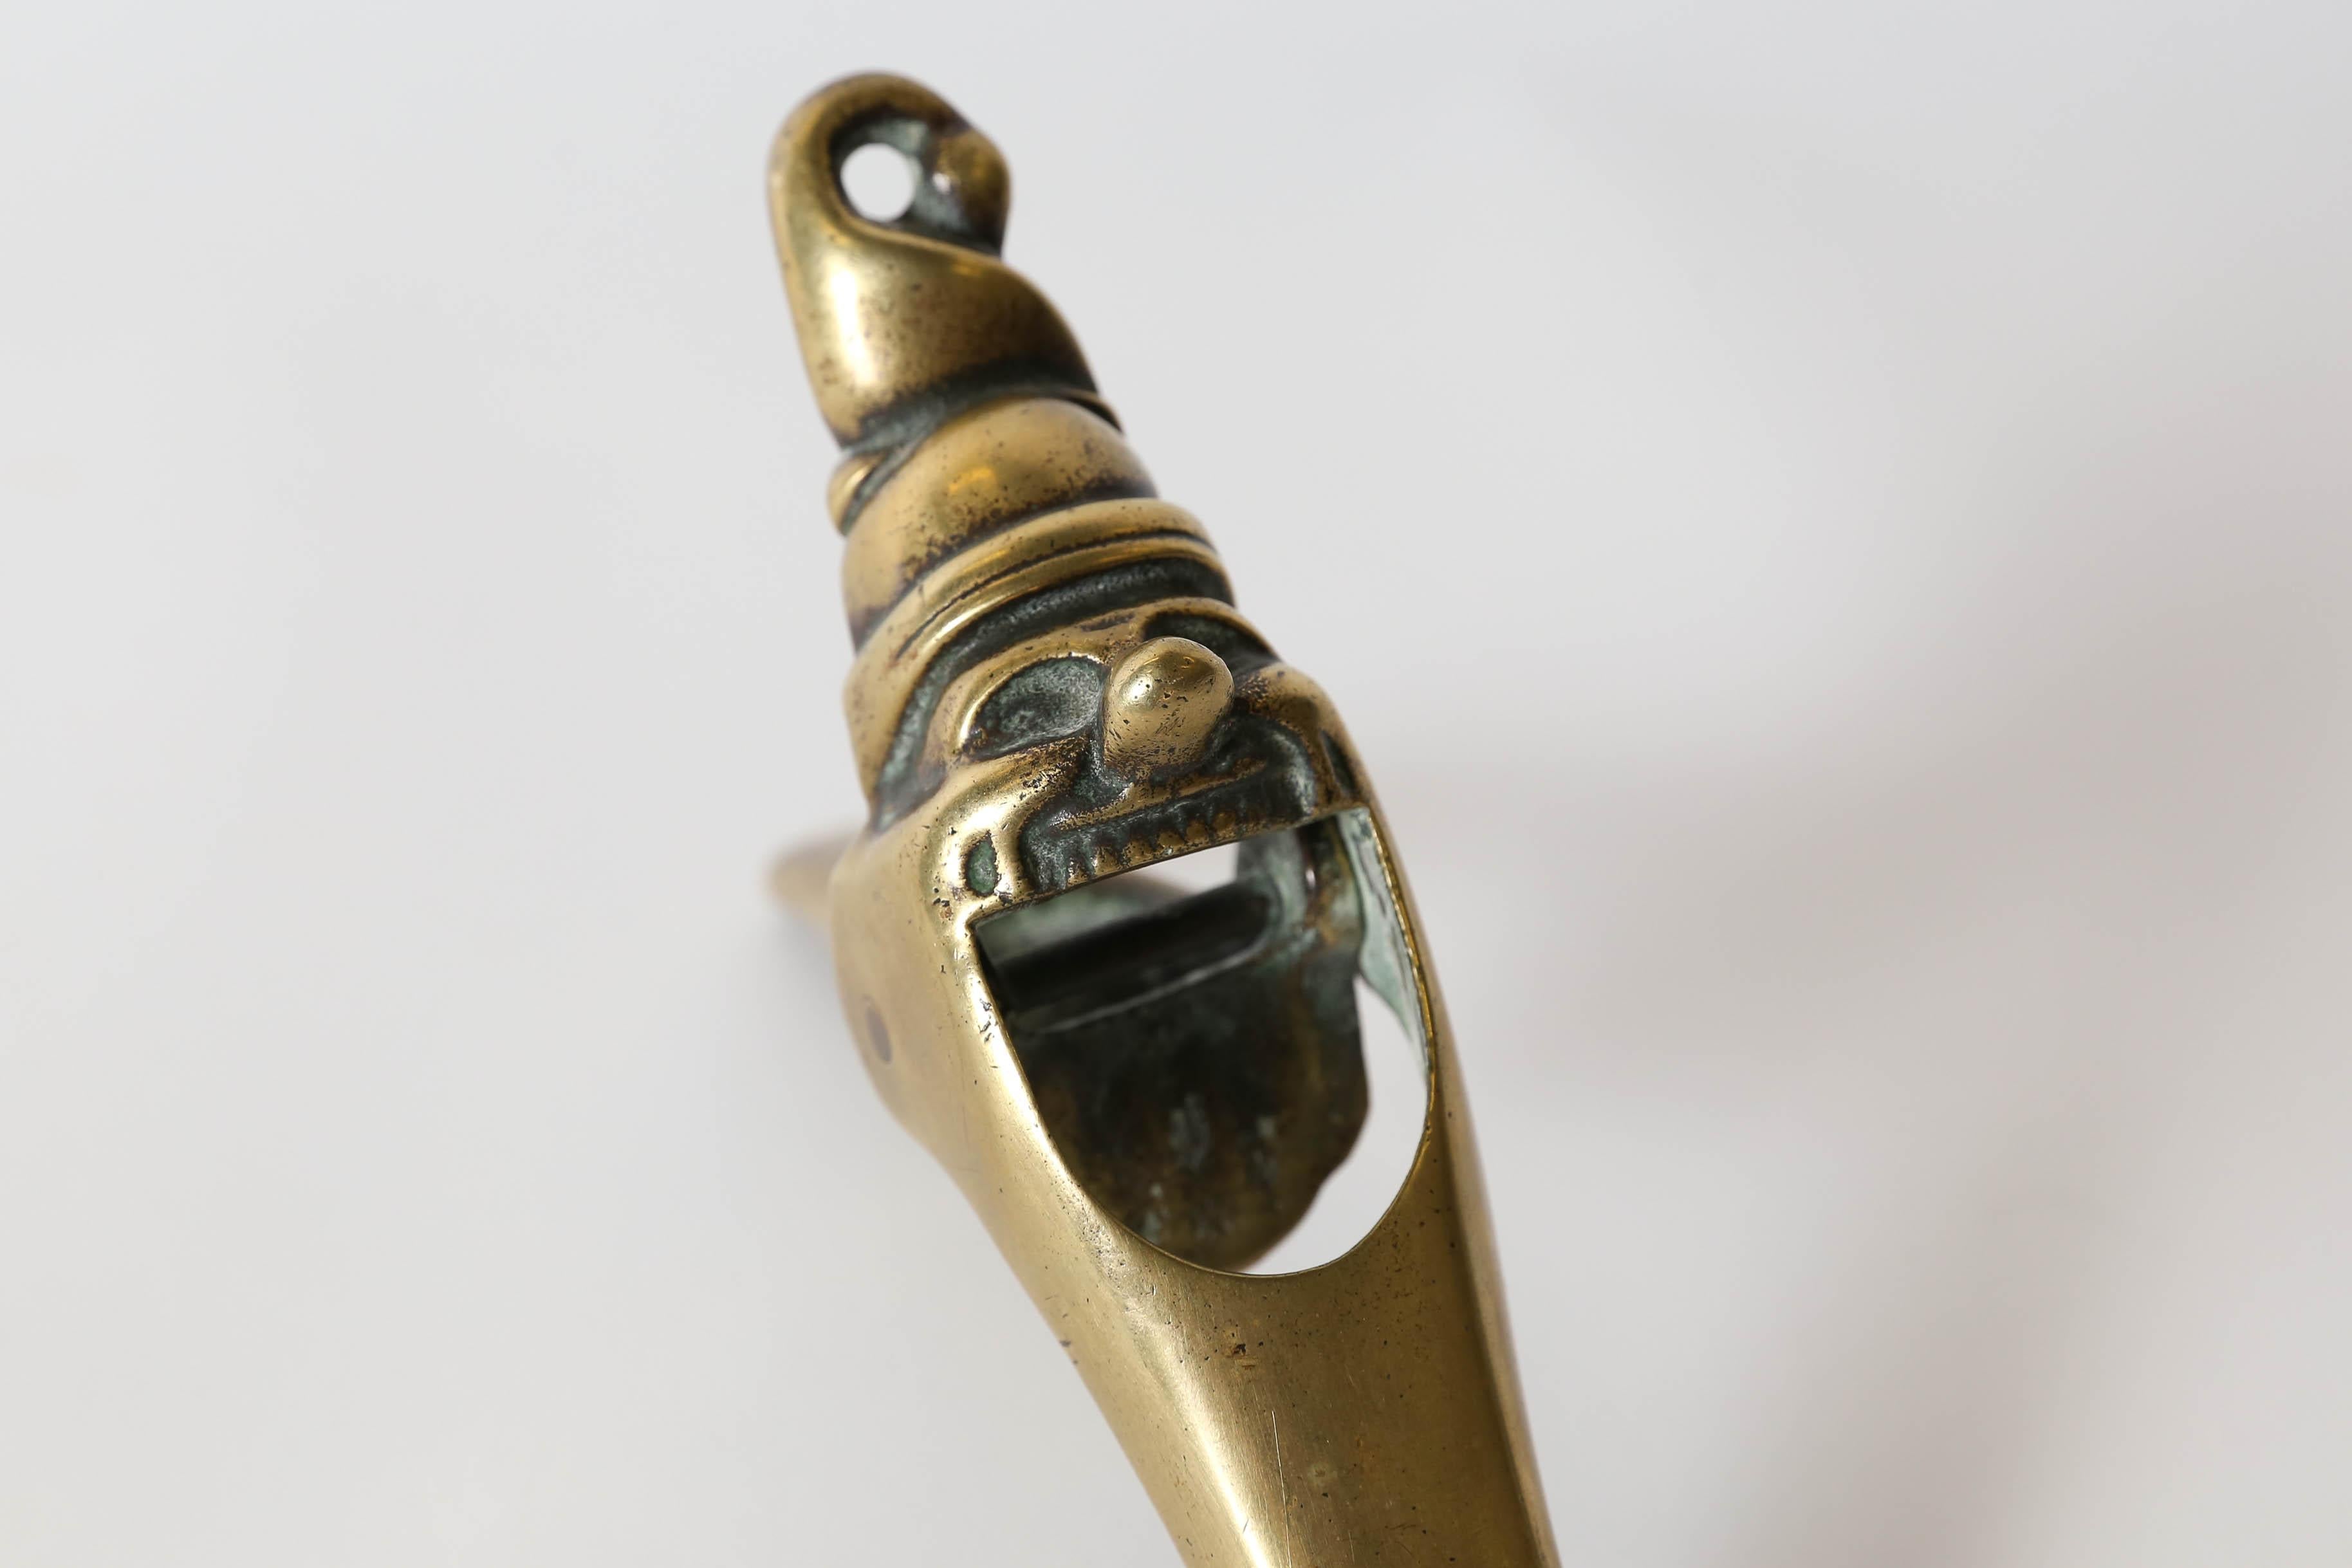 Solid brass English nutcracker. A whimsical and functional piece to add to your collection. Made in the early 1900s this piece is sure to delight the owner.